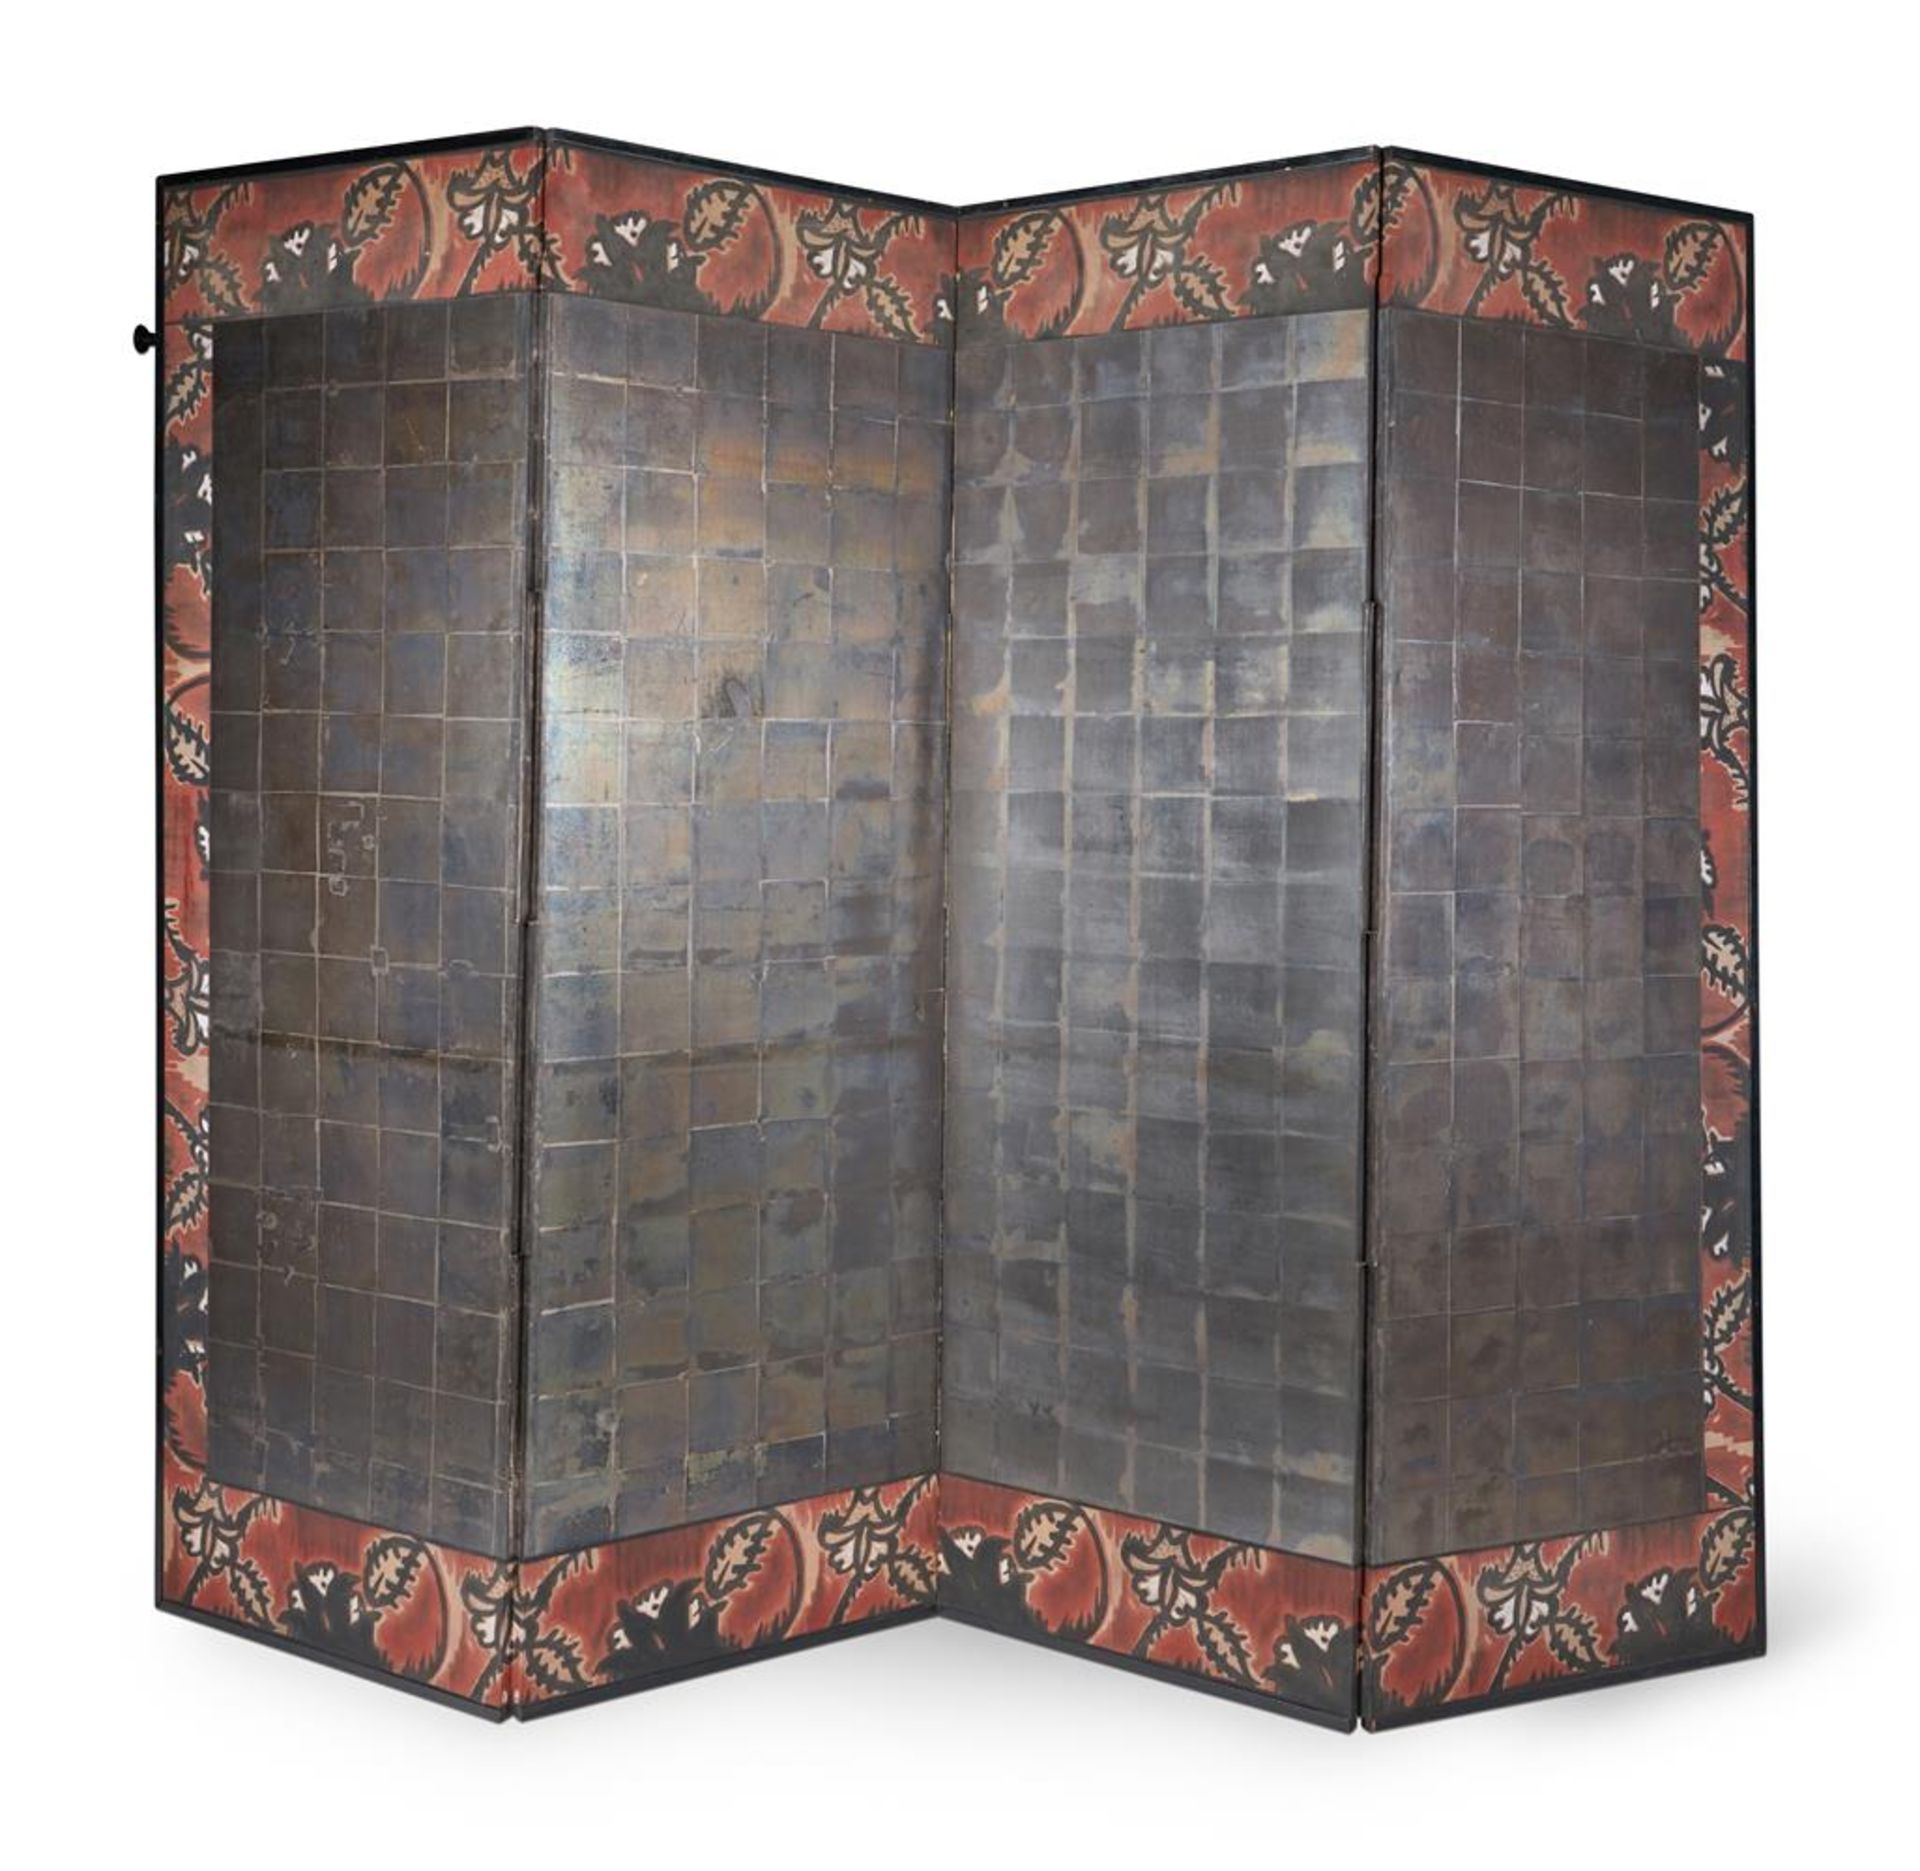 A PAINTED FOUR LEAF SCREEN IN THE STYLE OF THE BLOOMSBURY GROUP, LATE 20TH CENTURY